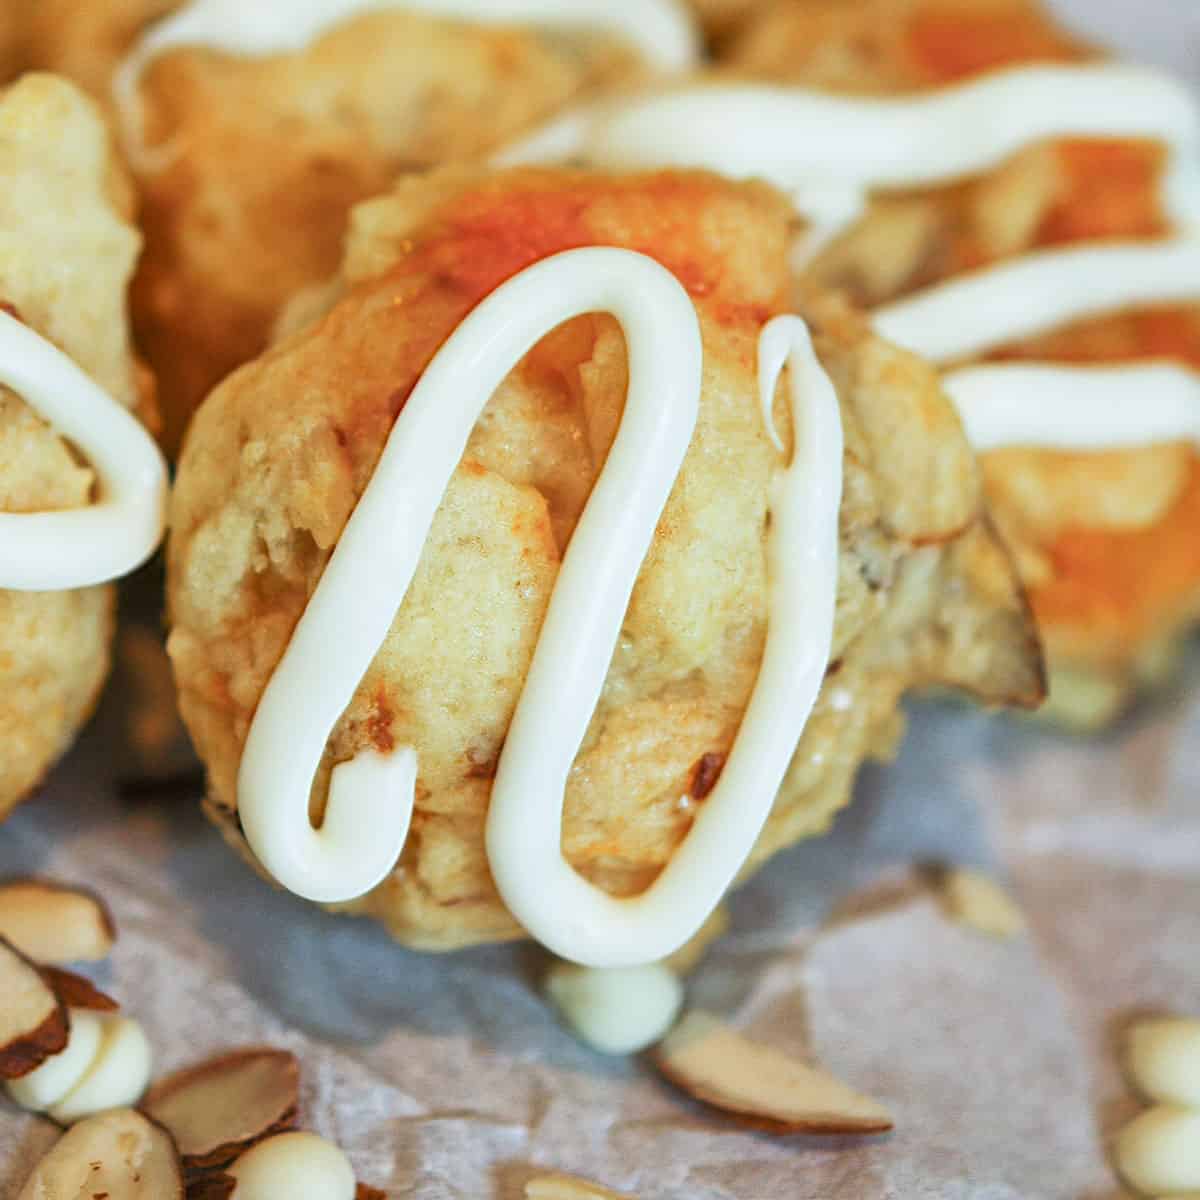 Fresh Apricot and Almond cookies with icing swirled on top.